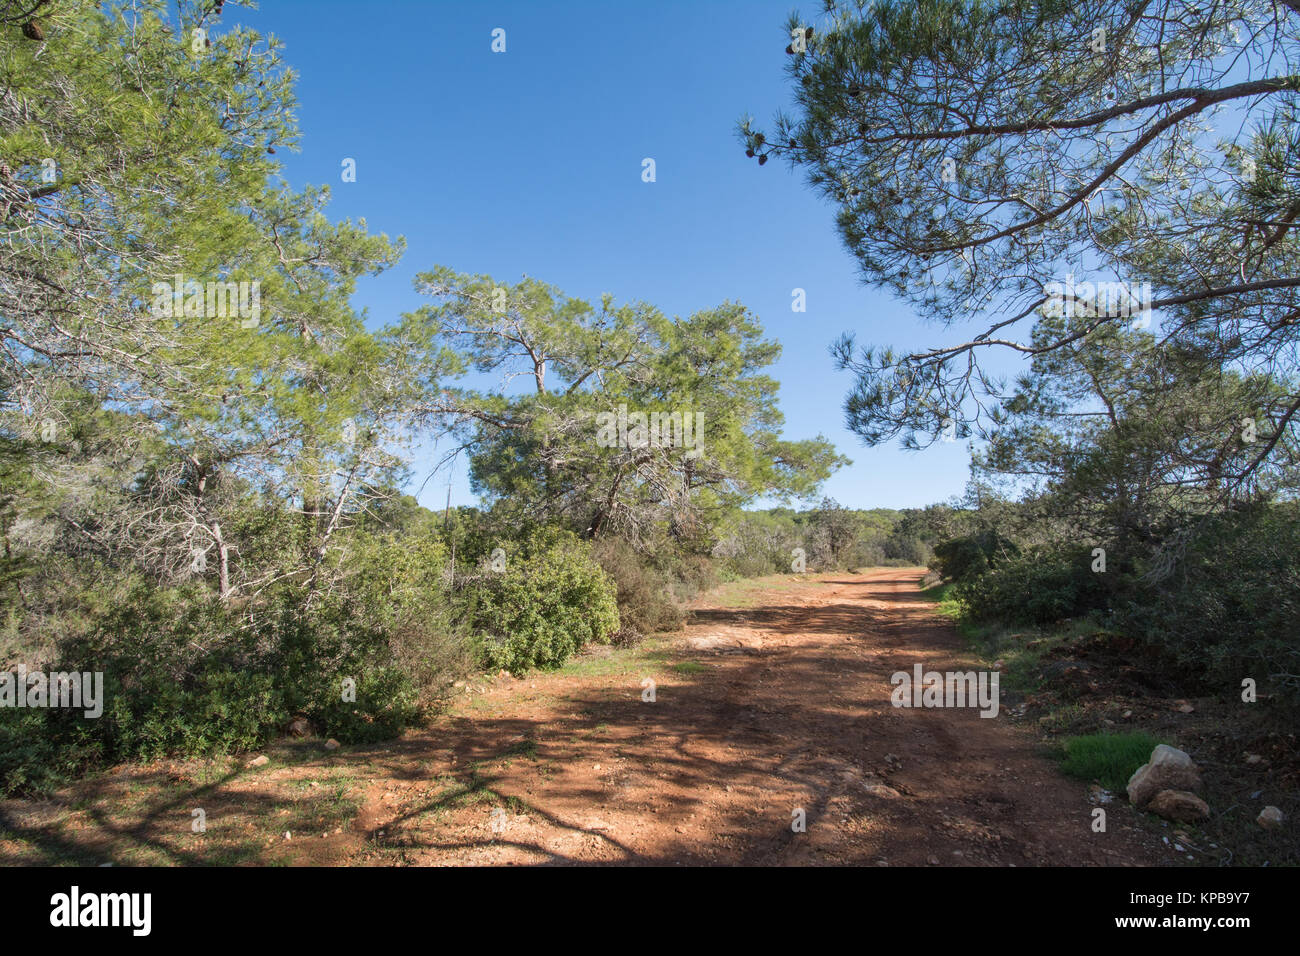 Woodland landscape in the Pegeia Forest in Cyprus, with pine (Pinus brutia) and juniper (Juniperus phoenicea) trees Stock Photo